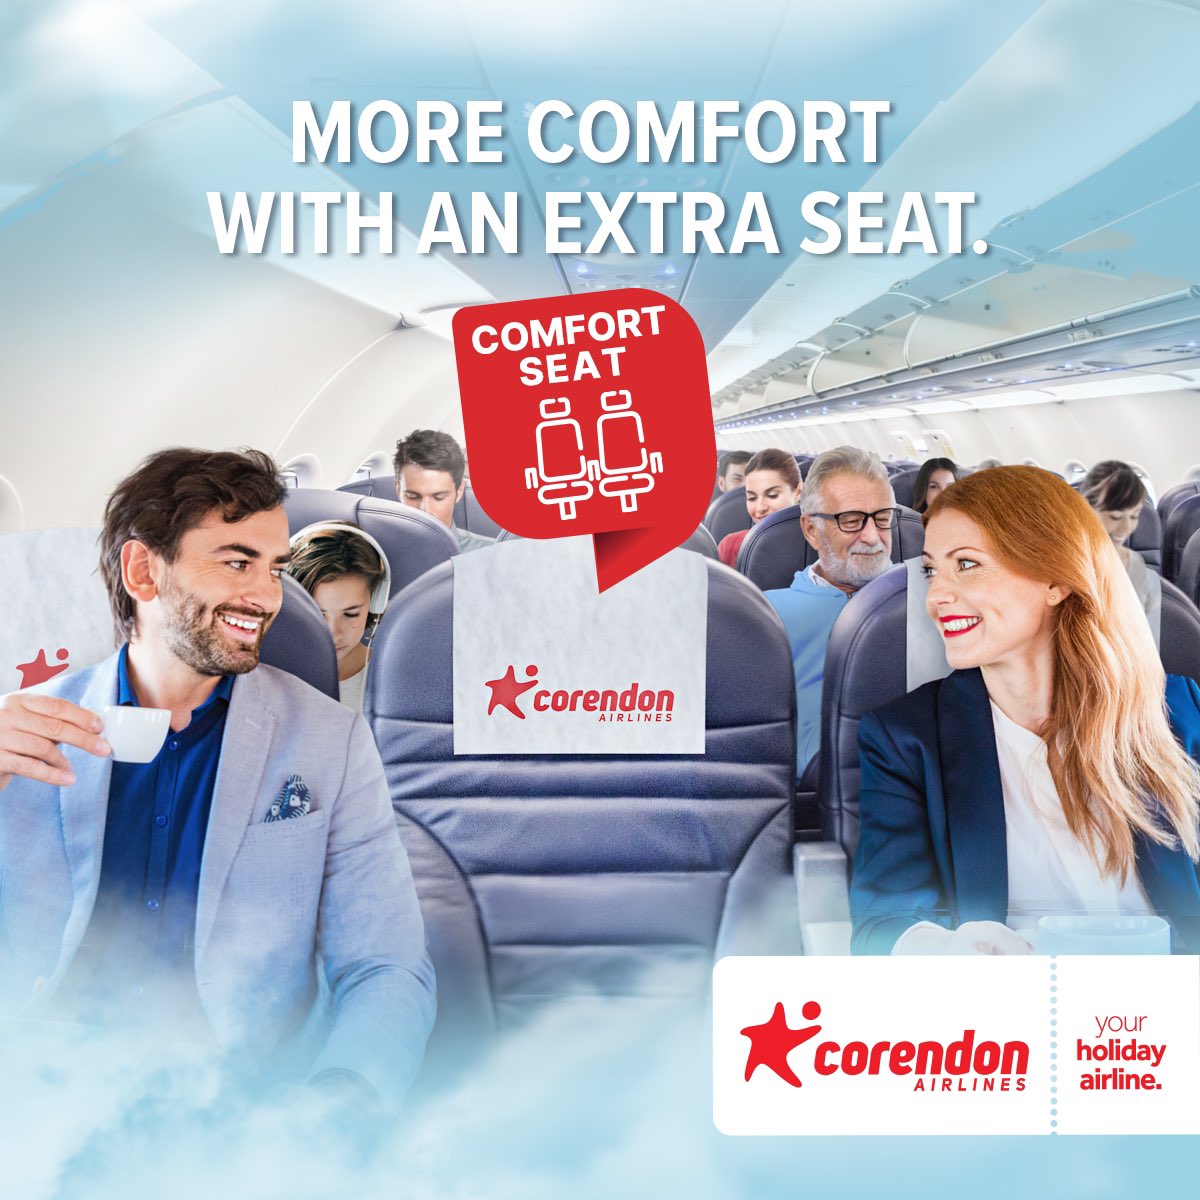 Enjoy the convenience ensured by our ‘Comfort seats’ 💺💺 Corendon Airlines allows you to book the seat next to you on board at an affordable price. ✈️ 👉🏻 For more visit: corendonairlines.com #CorendonAirlines #yourholidayairline #moresunmorefun #freeseat #haveaniceflight